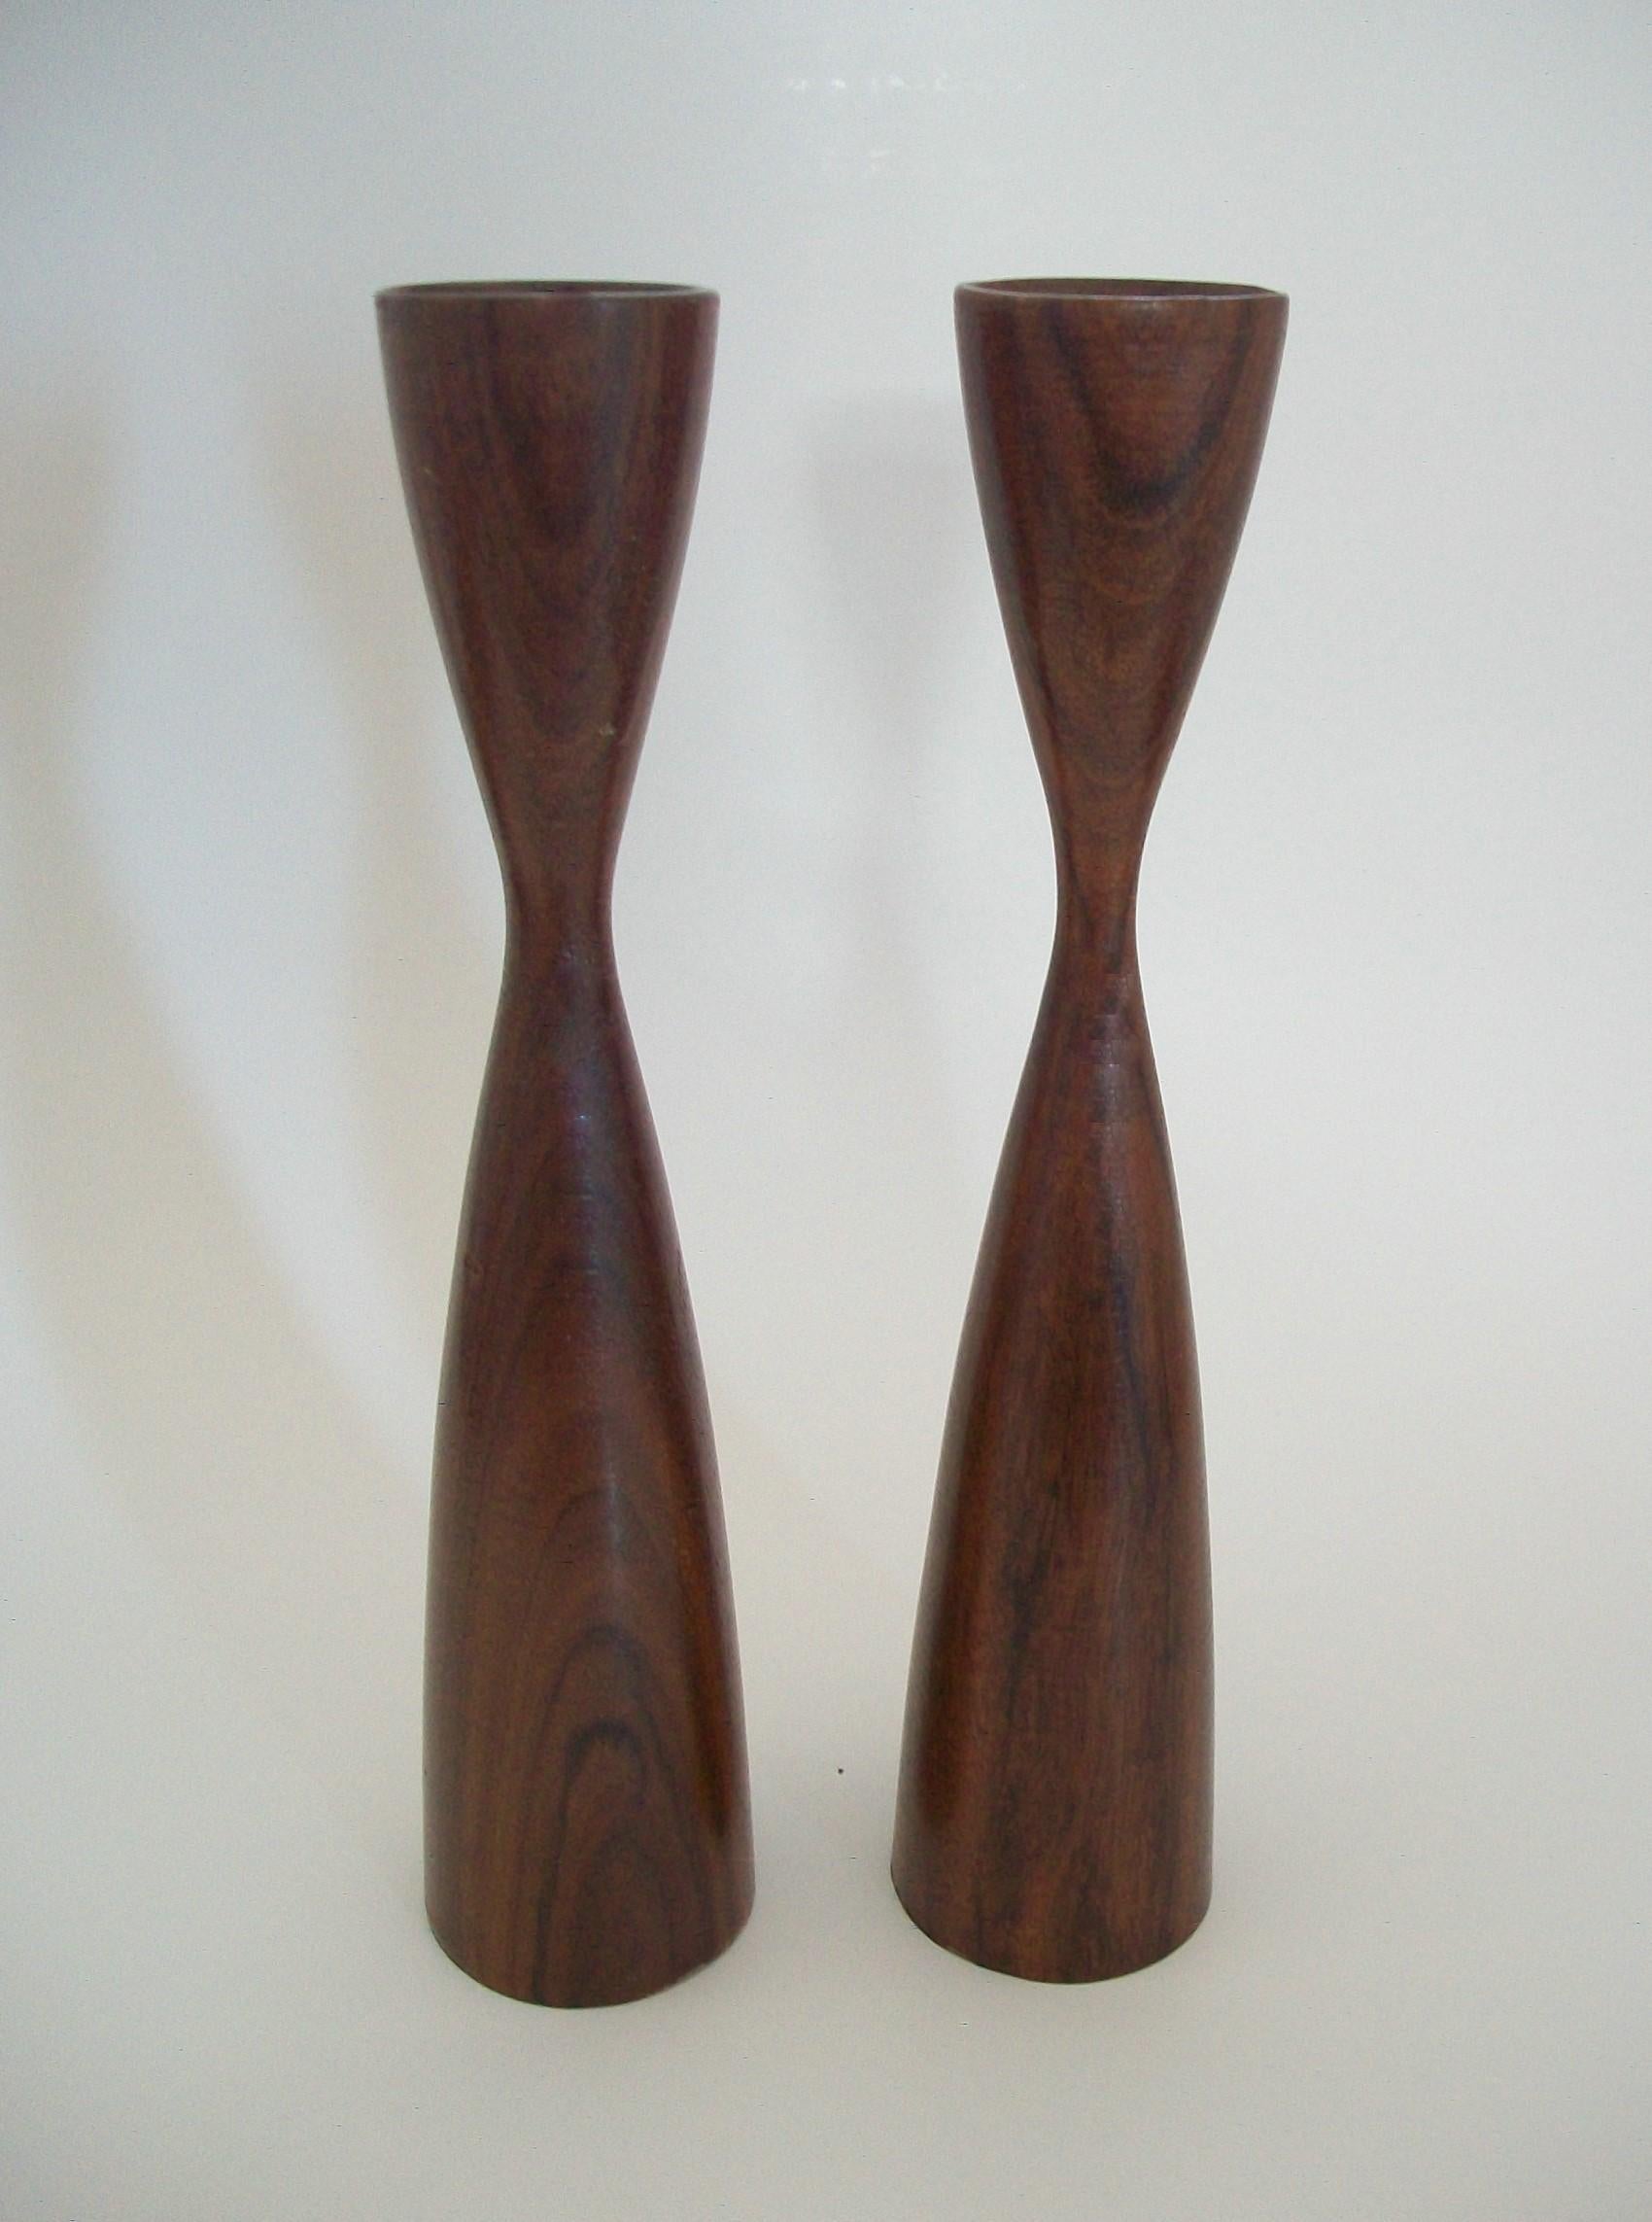 Hand-Crafted Pair of Midcentury Danish Teak Candlesticks, Signed, Denmark, circa 1960s For Sale